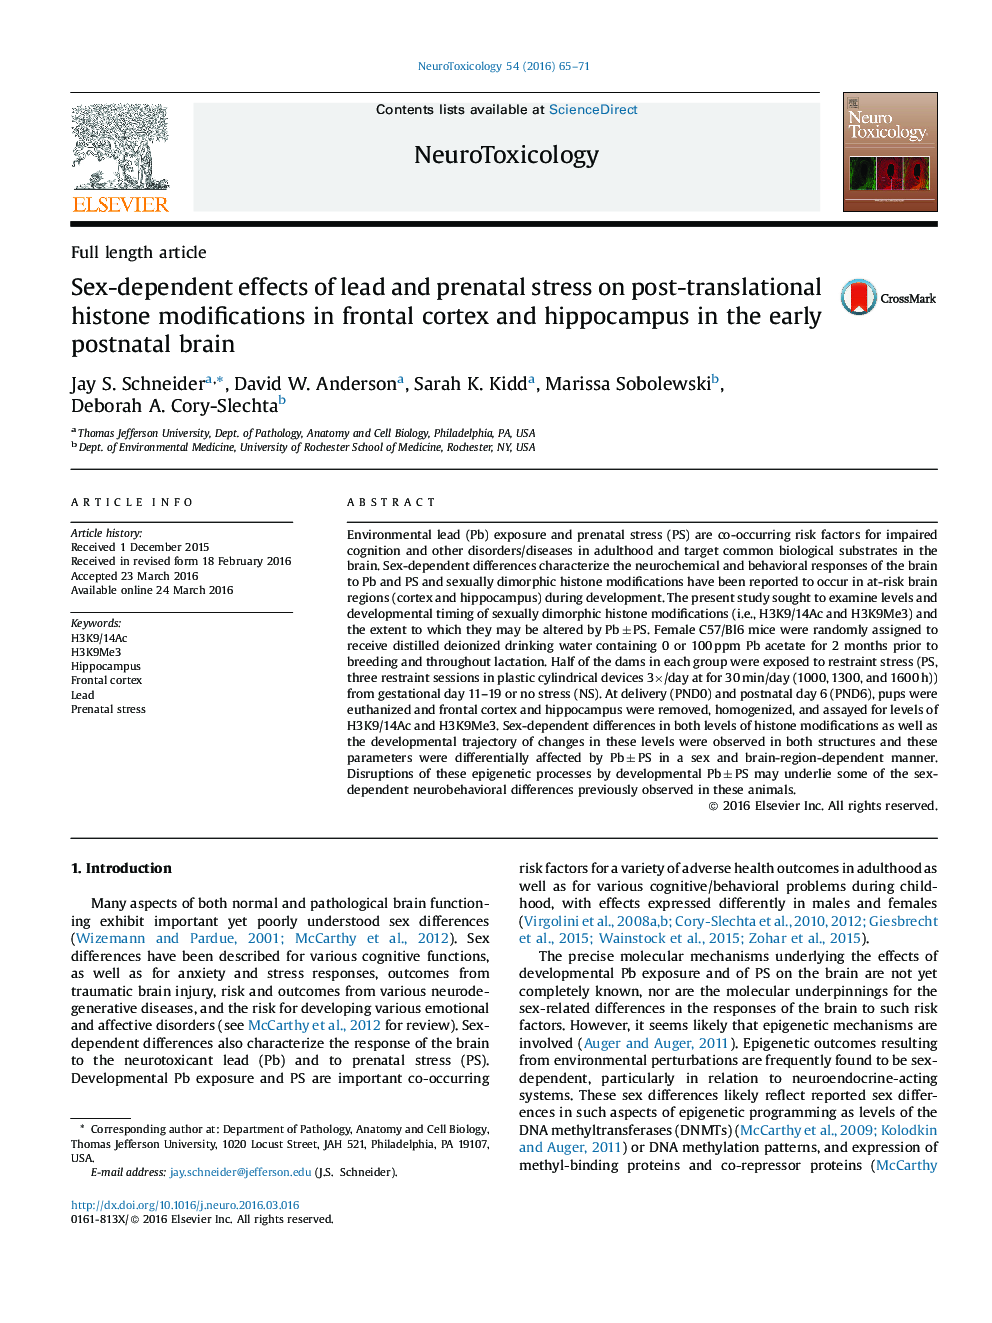 Full length articleSex-dependent effects of lead and prenatal stress on post-translational histone modifications in frontal cortex and hippocampus in the early postnatal brain